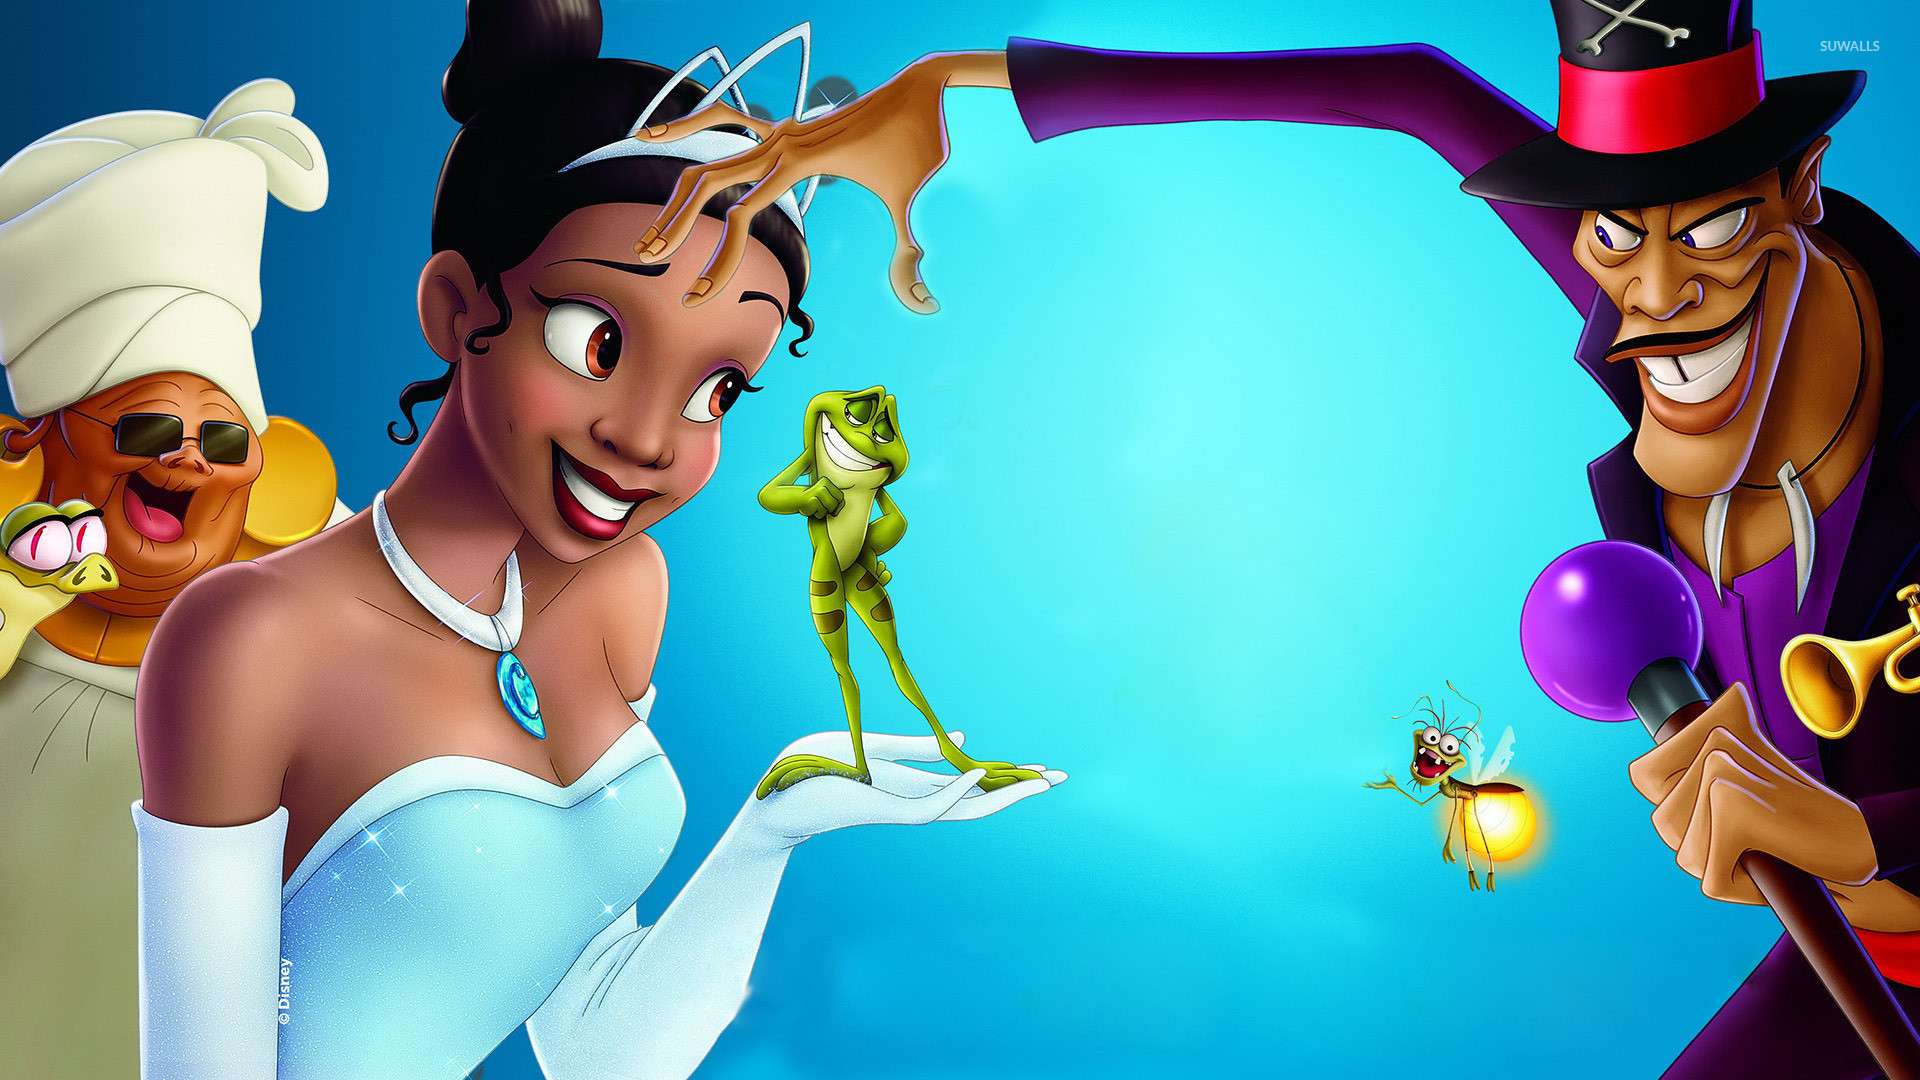 1920x1080 The Princess and the Frog wallpaper